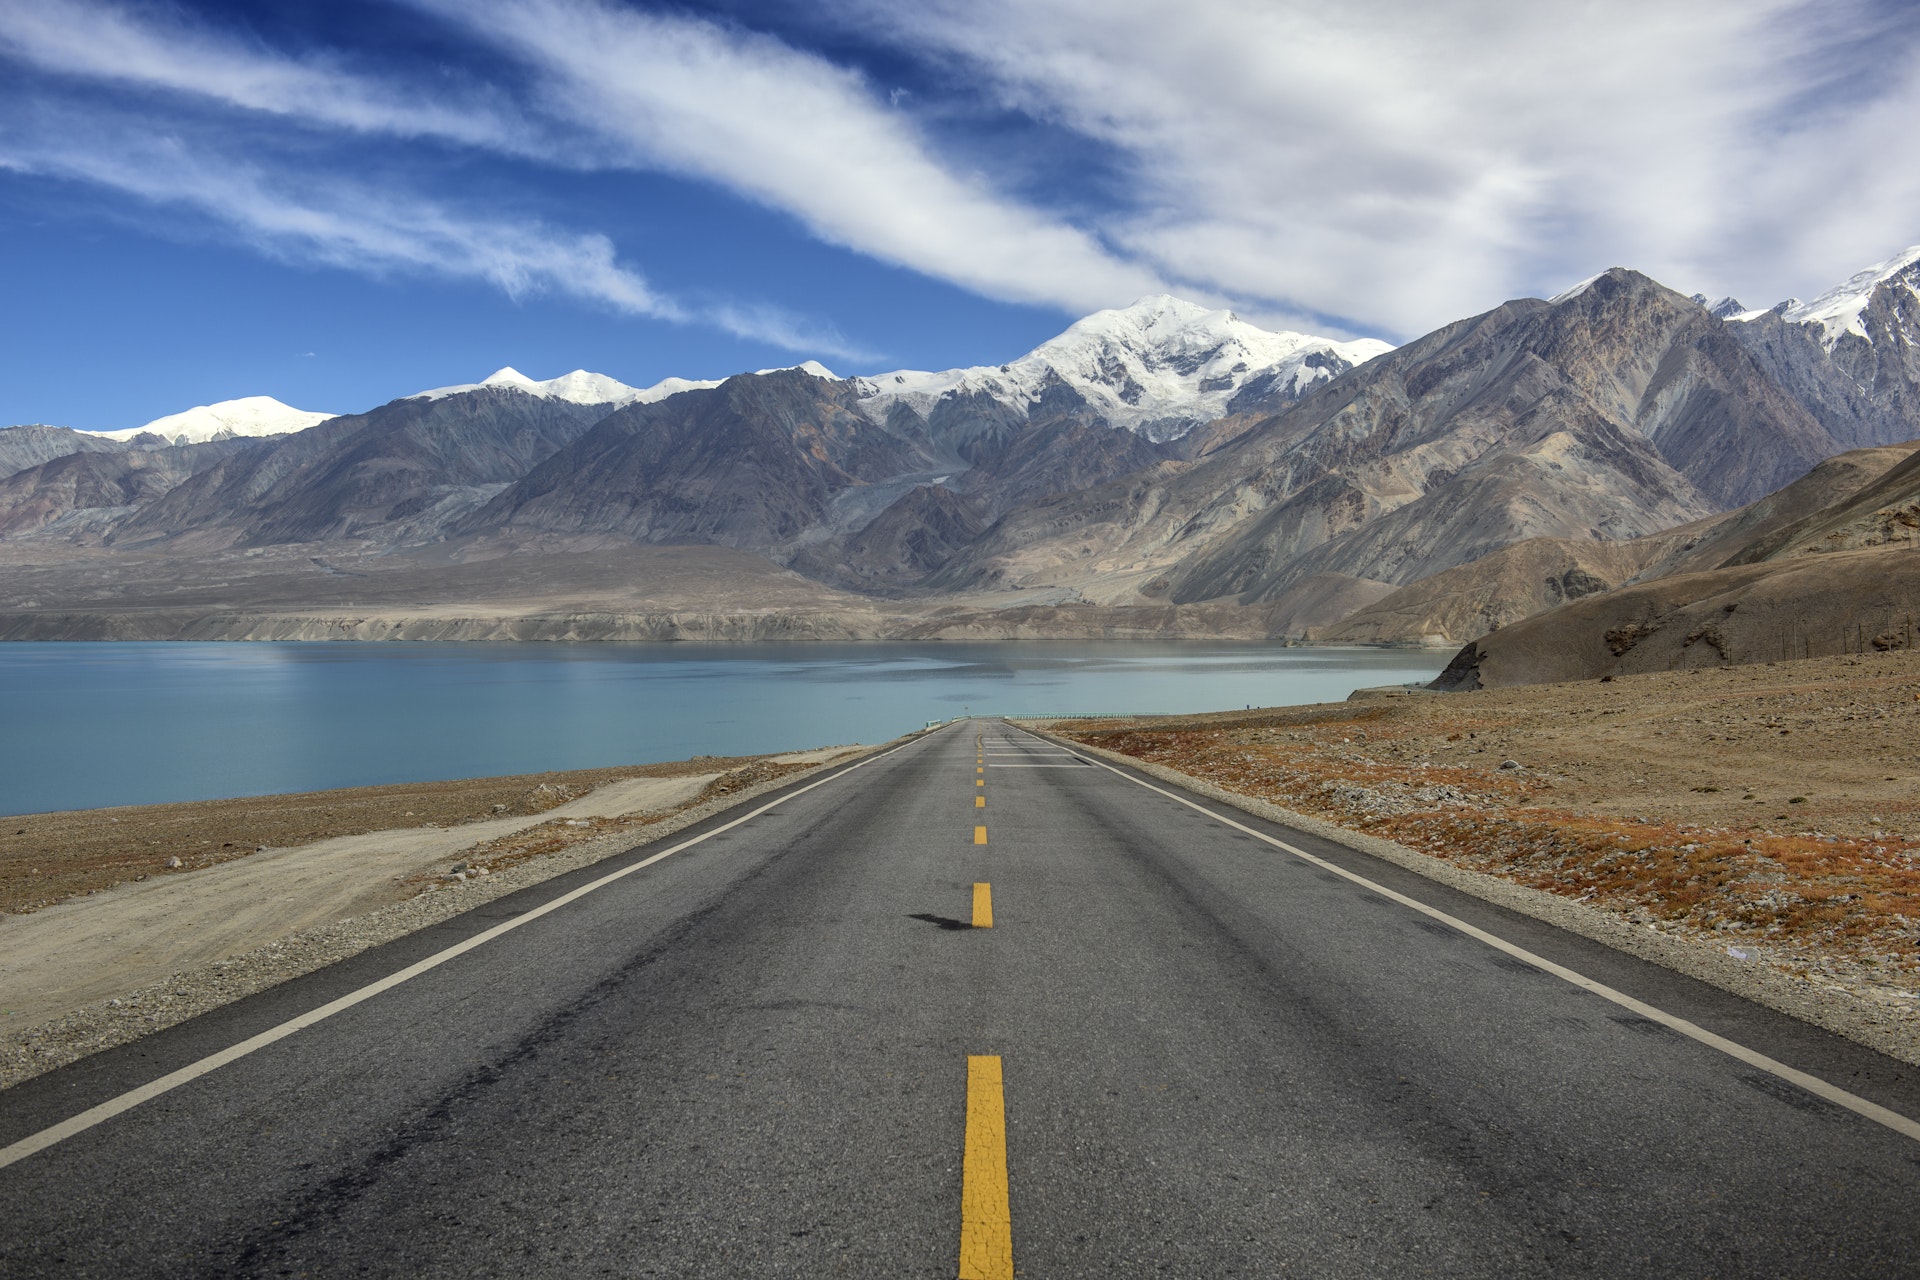 A long empty stretch of the Karakoram Highway with mountain peaks in the background